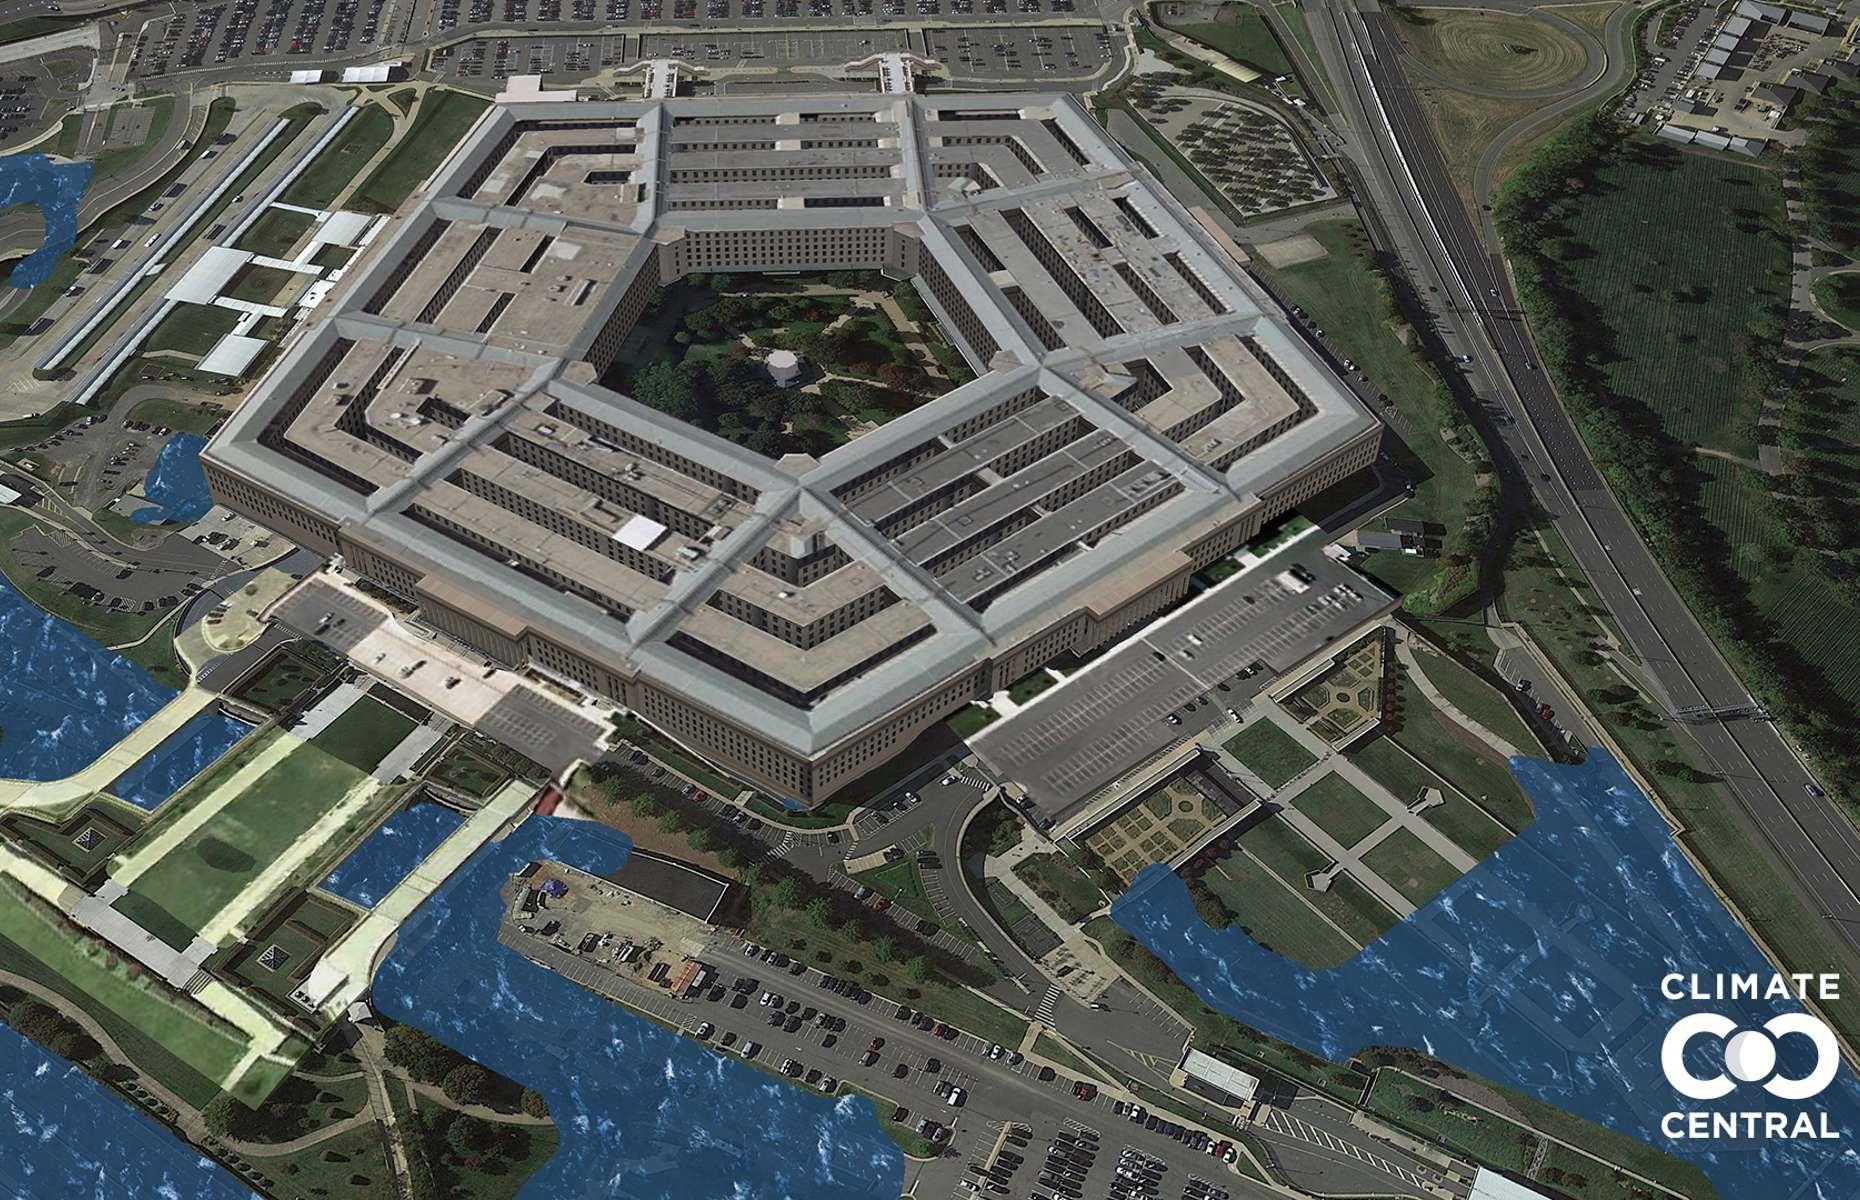 The Pentagon was built during the Second World War and is currently the headquarters of the US Department of Defense – the army, navy and Air Force. But in the event of a 3°C (5.4°F) temperature rise, there won’t be much left of its surroundings.